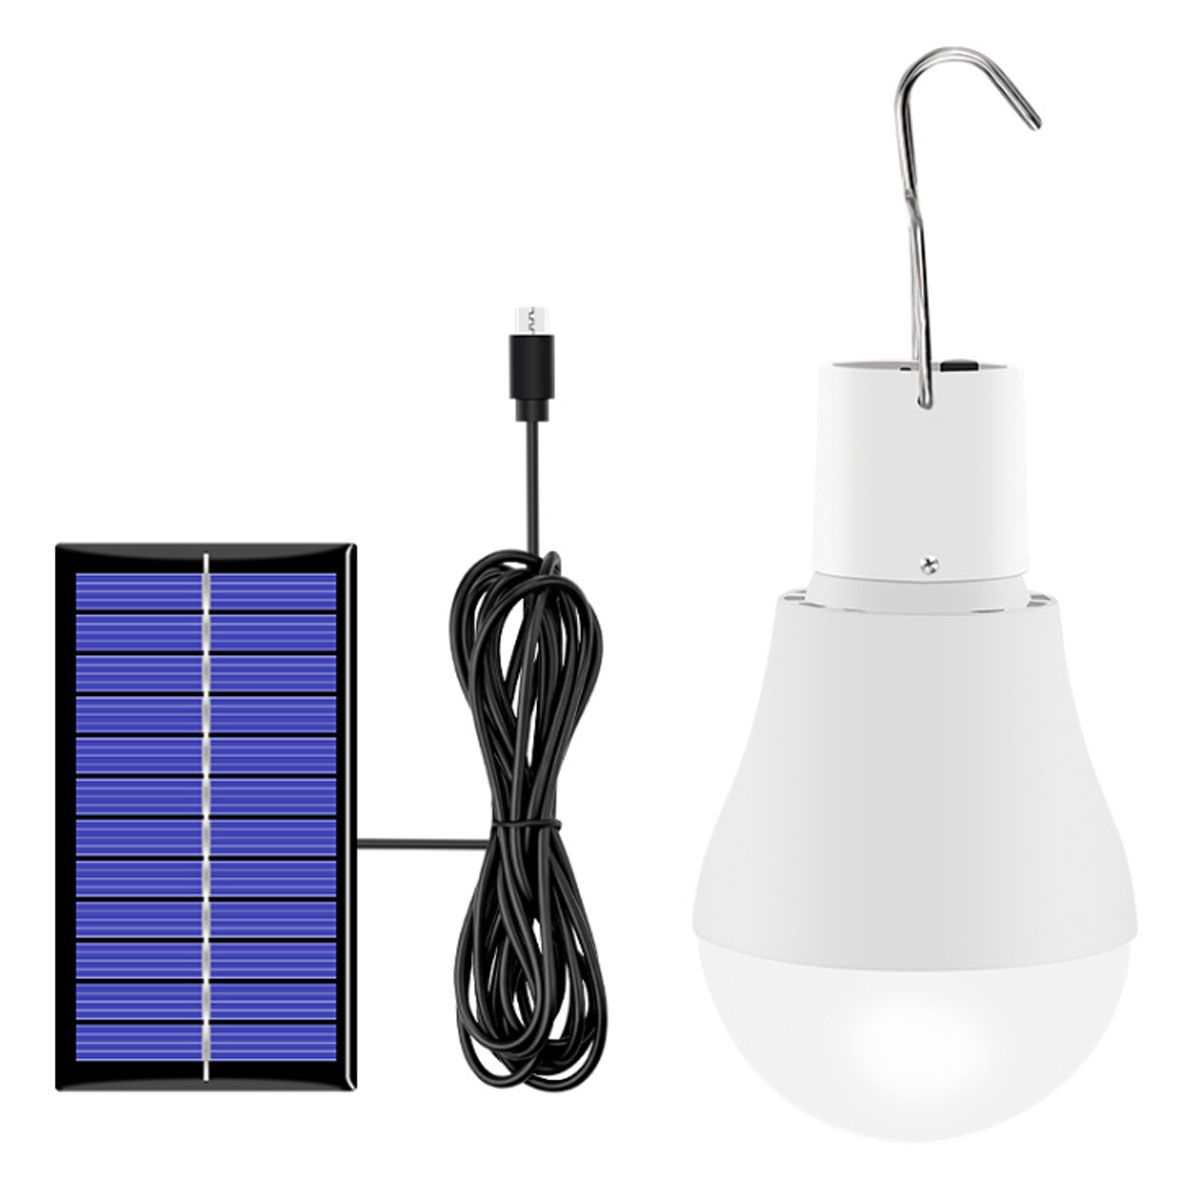 USB-Portable-Solar-Powered-LED-Light-Bulb-Outdoor-Camping-Yard-Lamp-With-Hook-DC5V-1721796